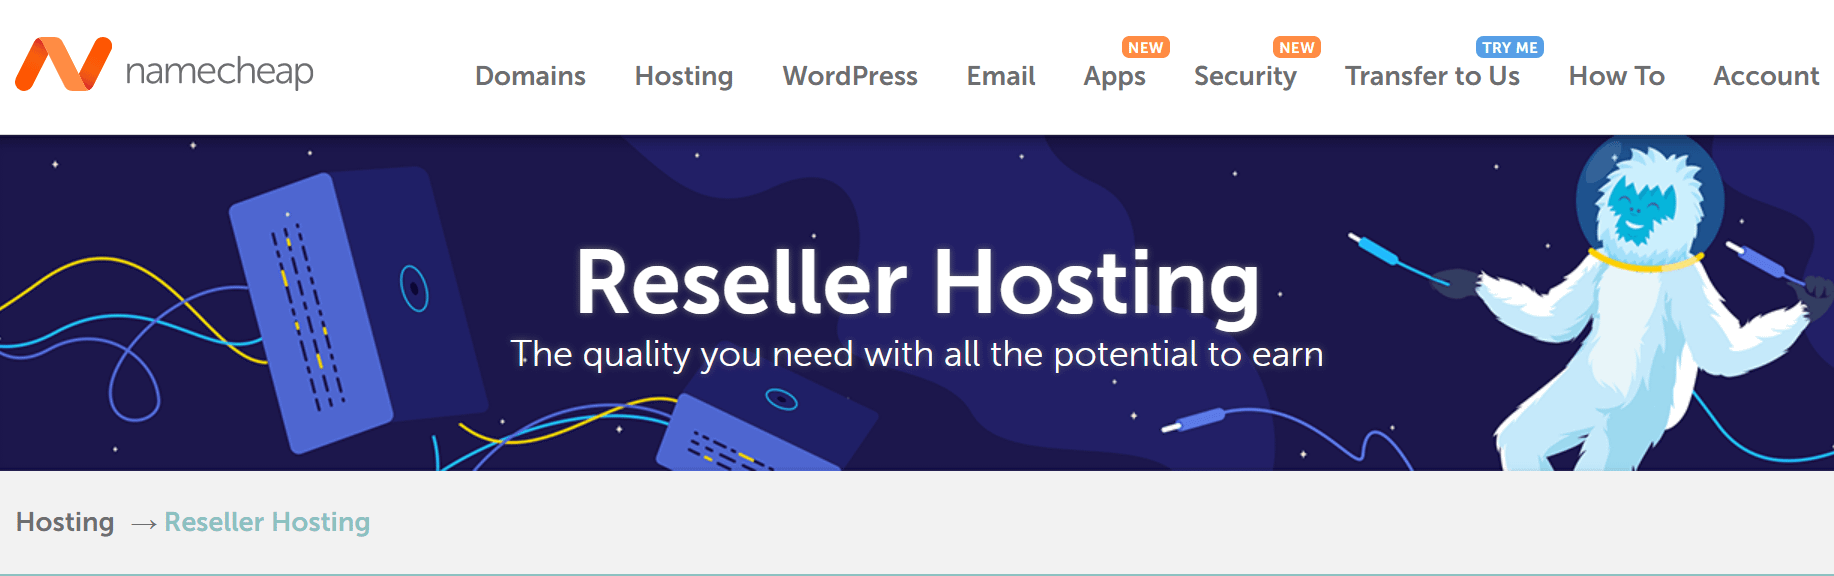 Namecheap's reseller hosting page.